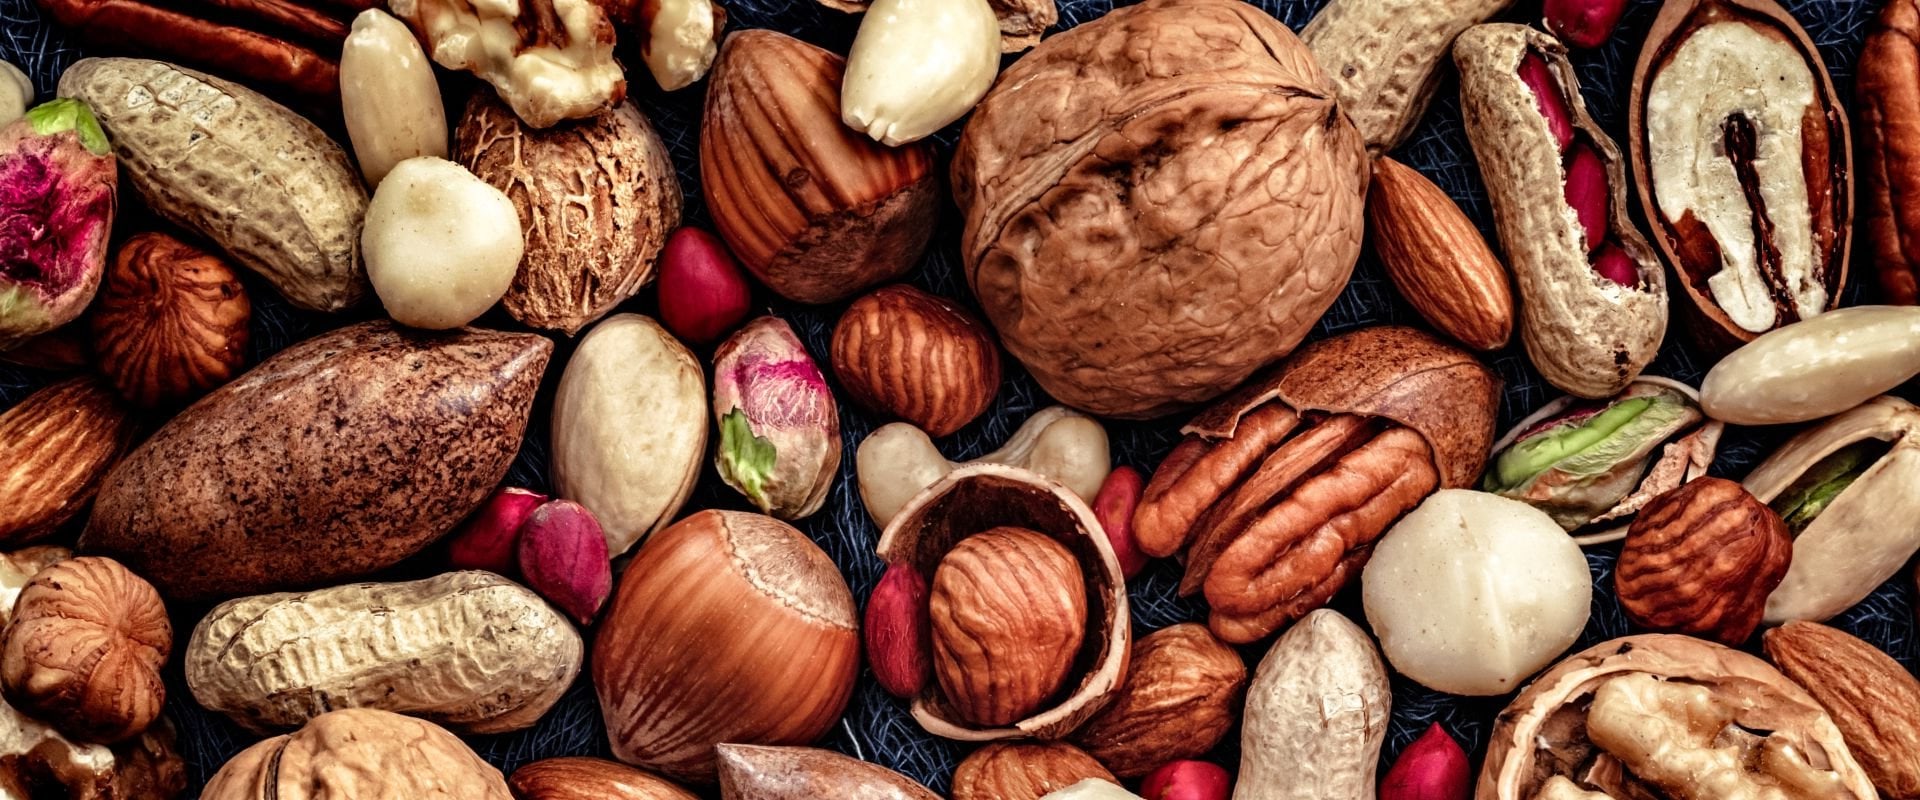 Exploring Nuts: A Look at the Different Types and Their Benefits